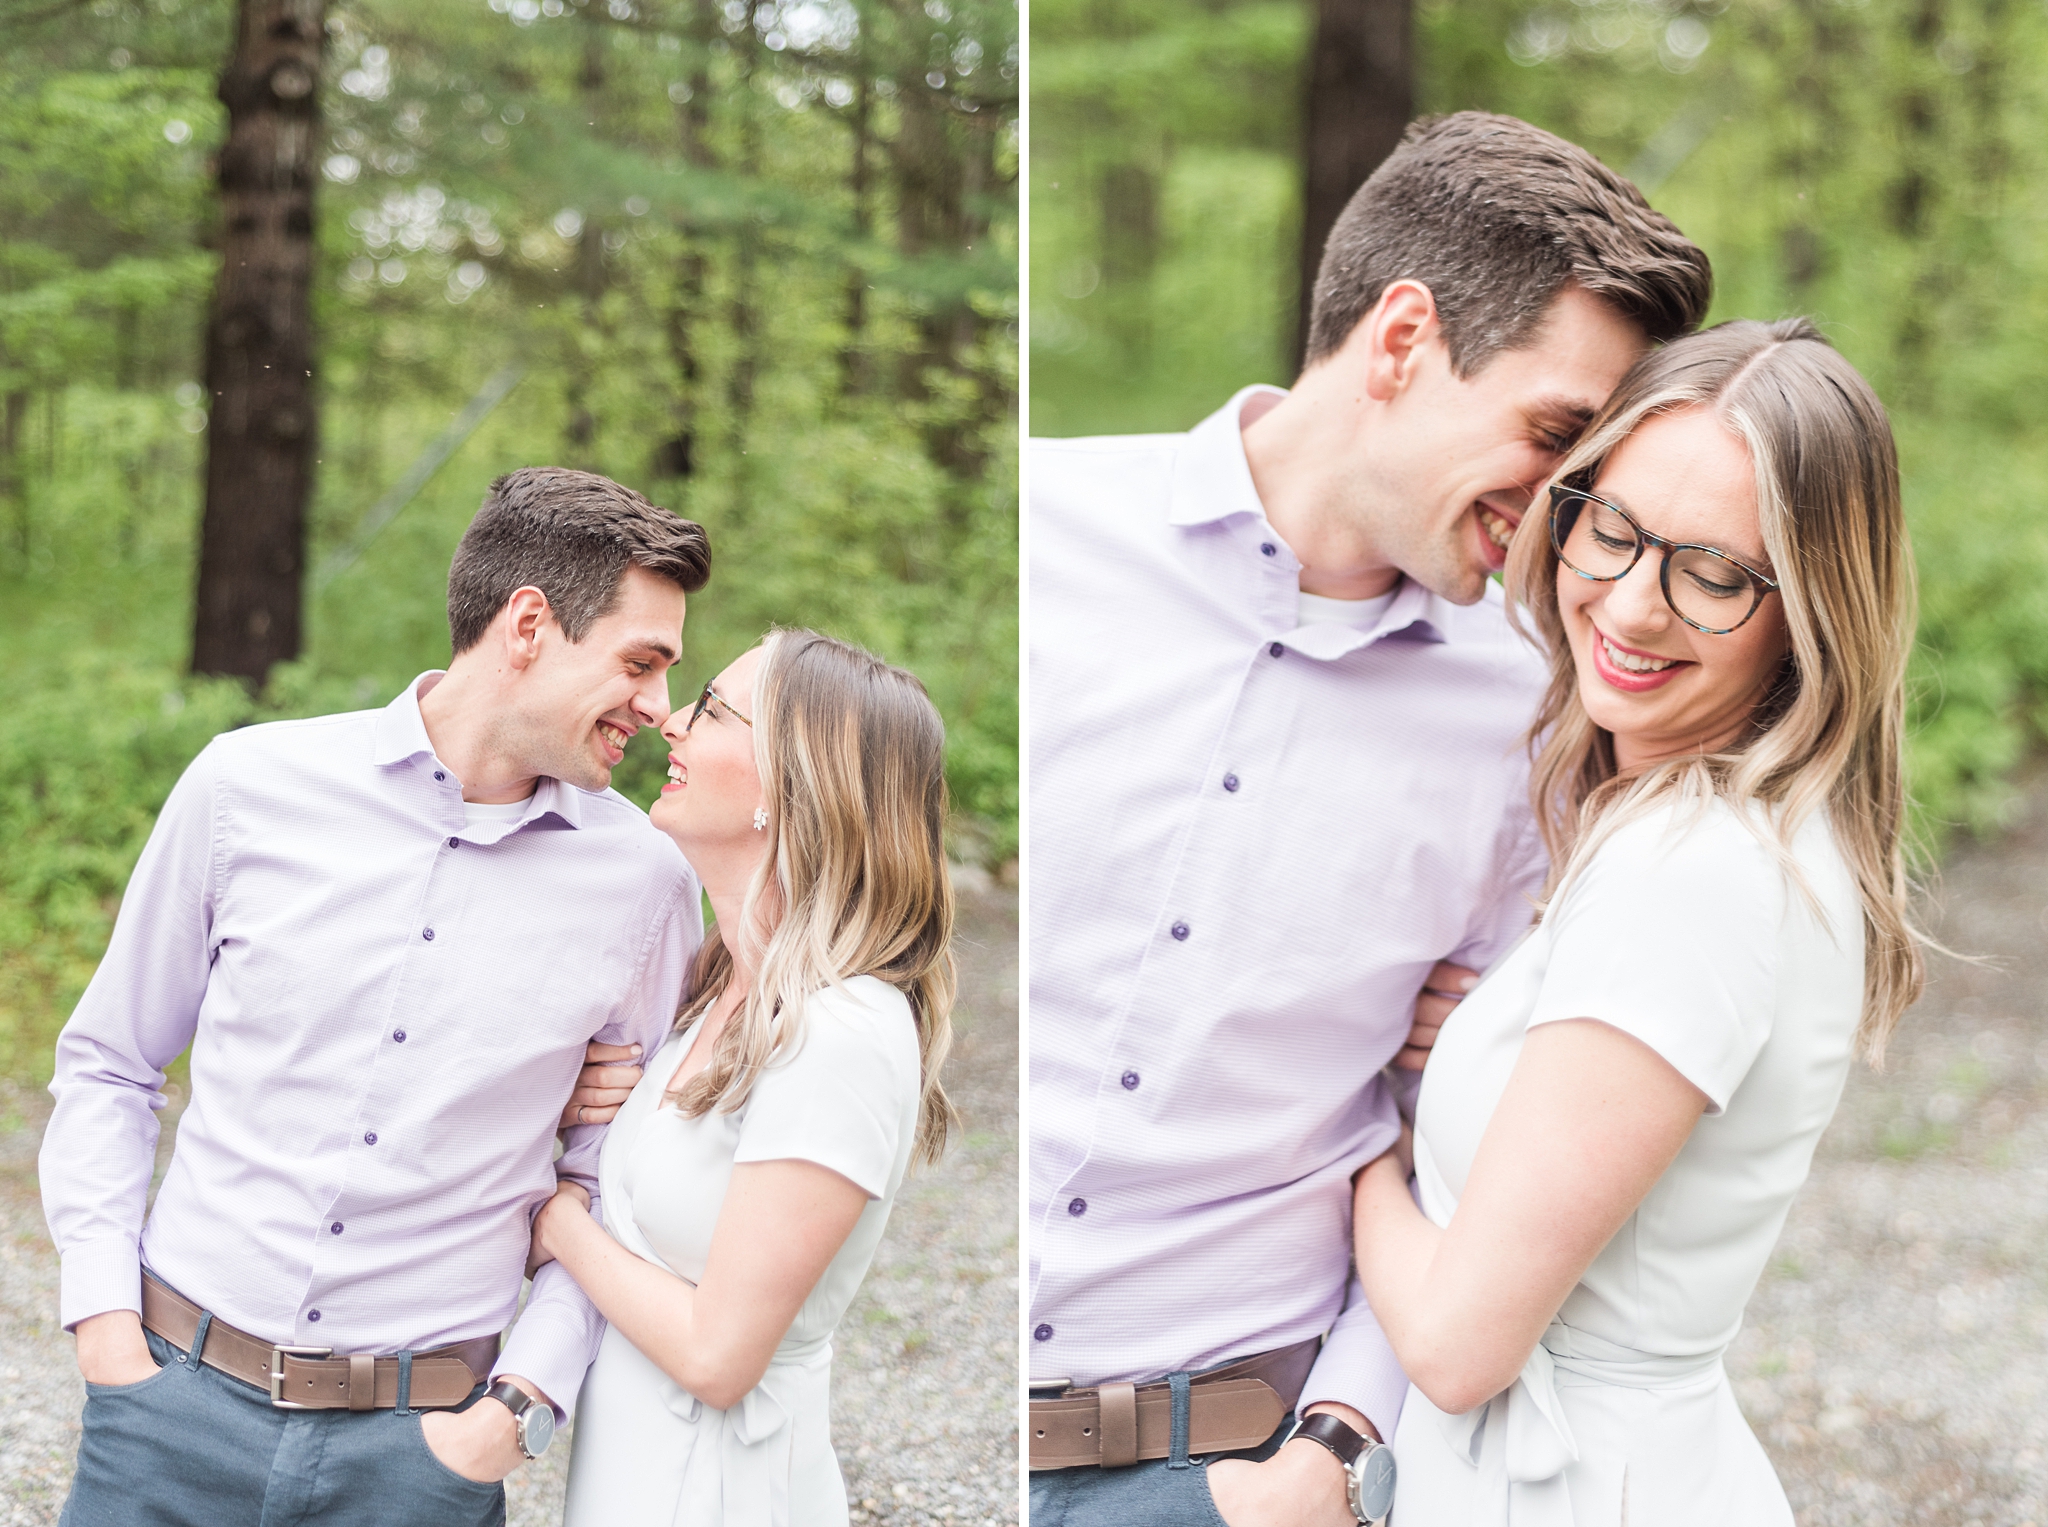 Spring sharbot lake engagement photos | ottawa engagement photos | cottage sharbot lake engagement session get more inspiration from this adorable waterside engagement session. #ottawaengagement #weddingphotography #ottawaweddings